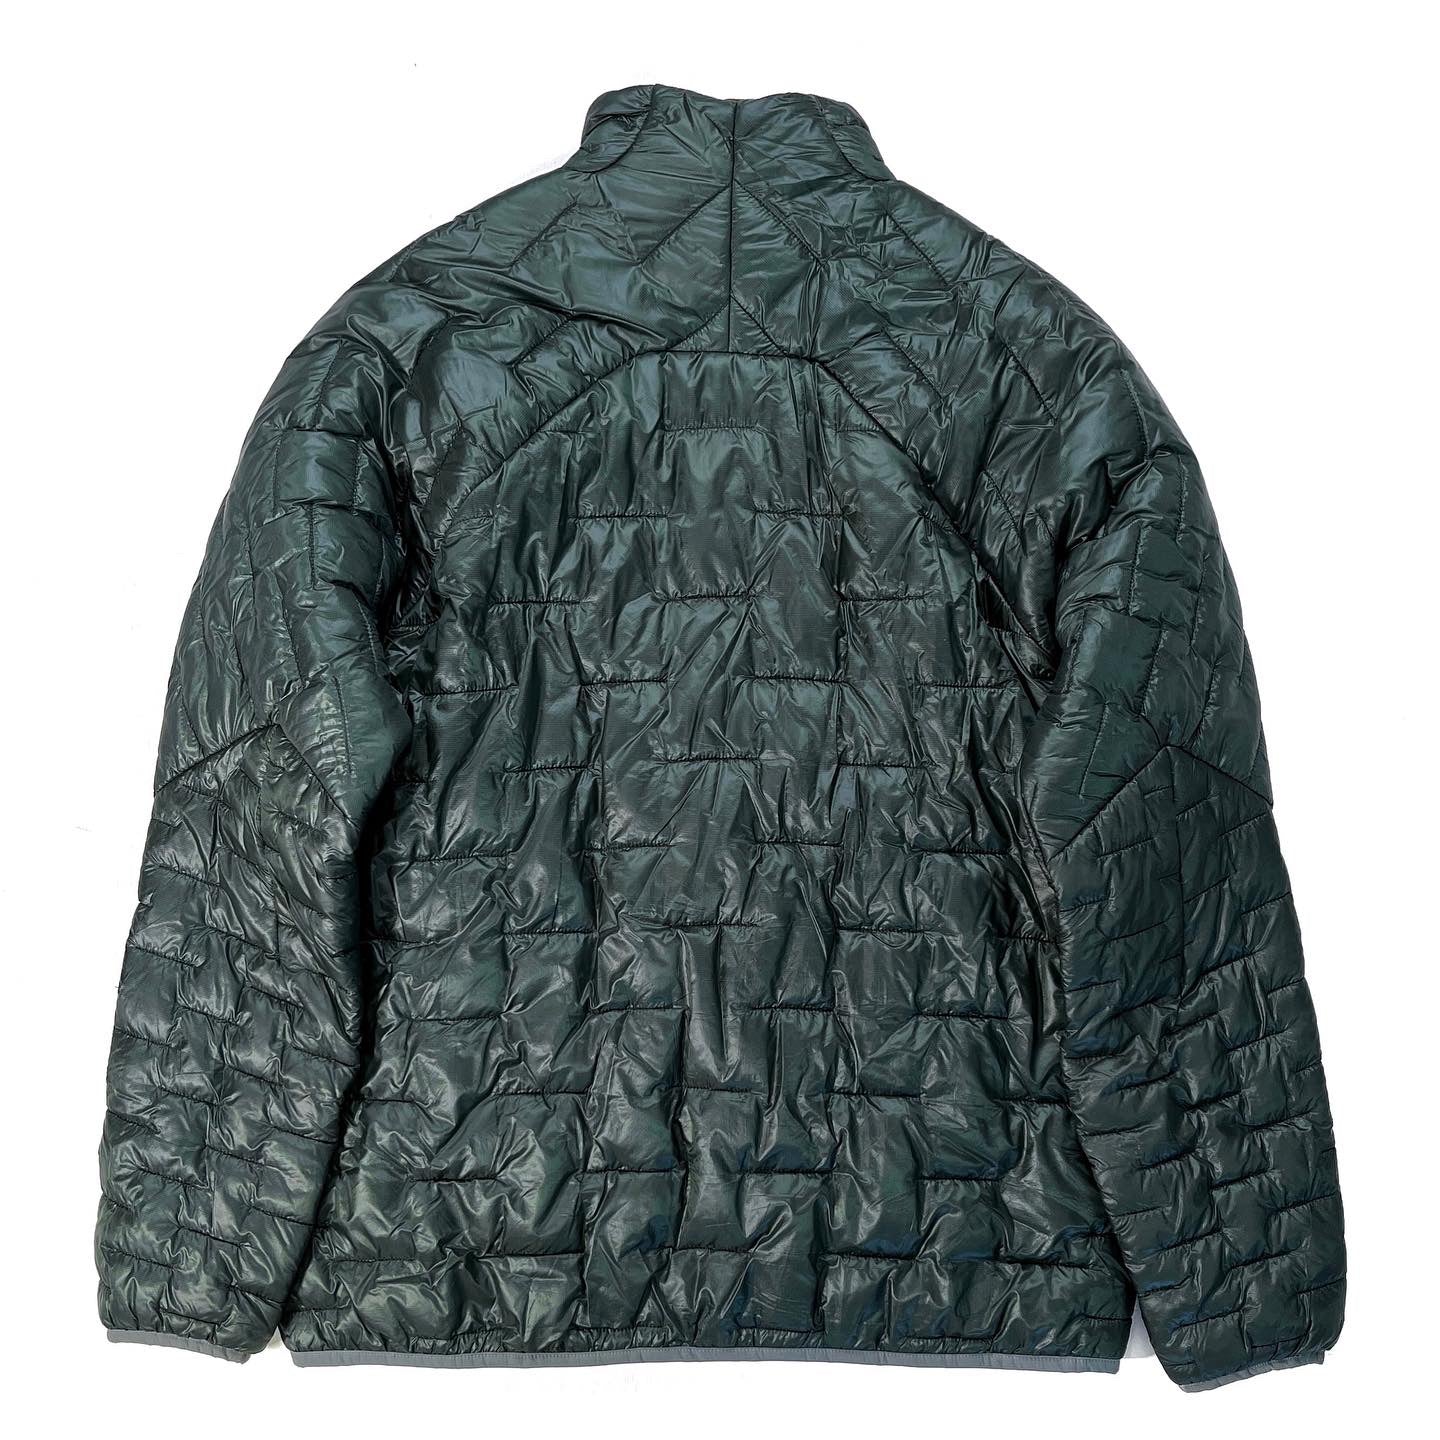 2019 Patagonia Mens Micro Puff Insulated Jacket, Carbon (L)